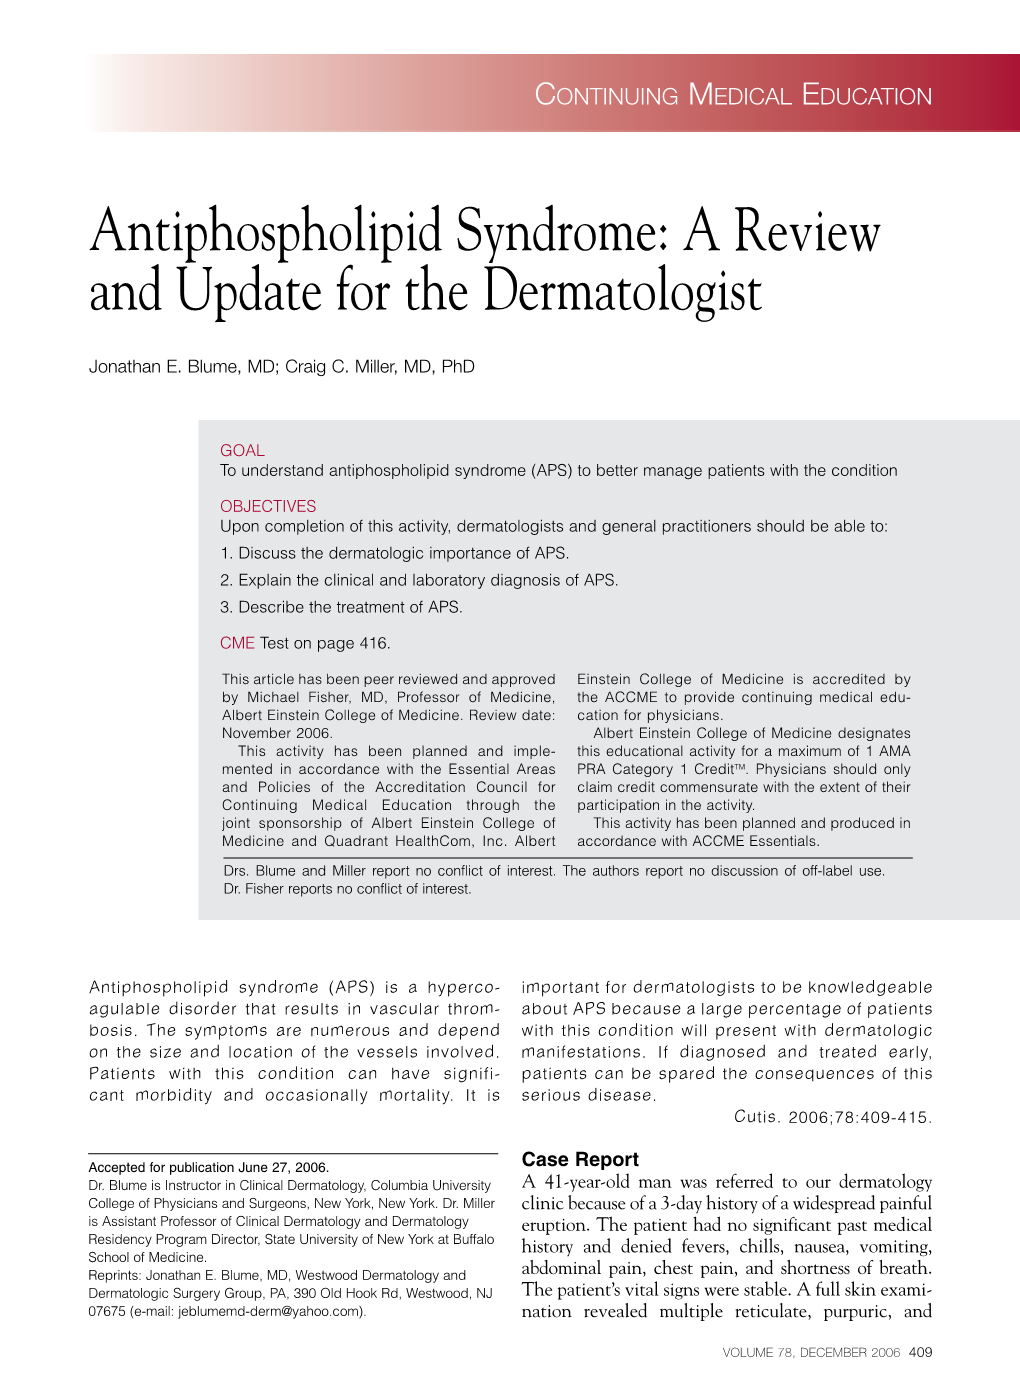 Antiphospholipid Syndrome: a Review and Update for the Dermatologist